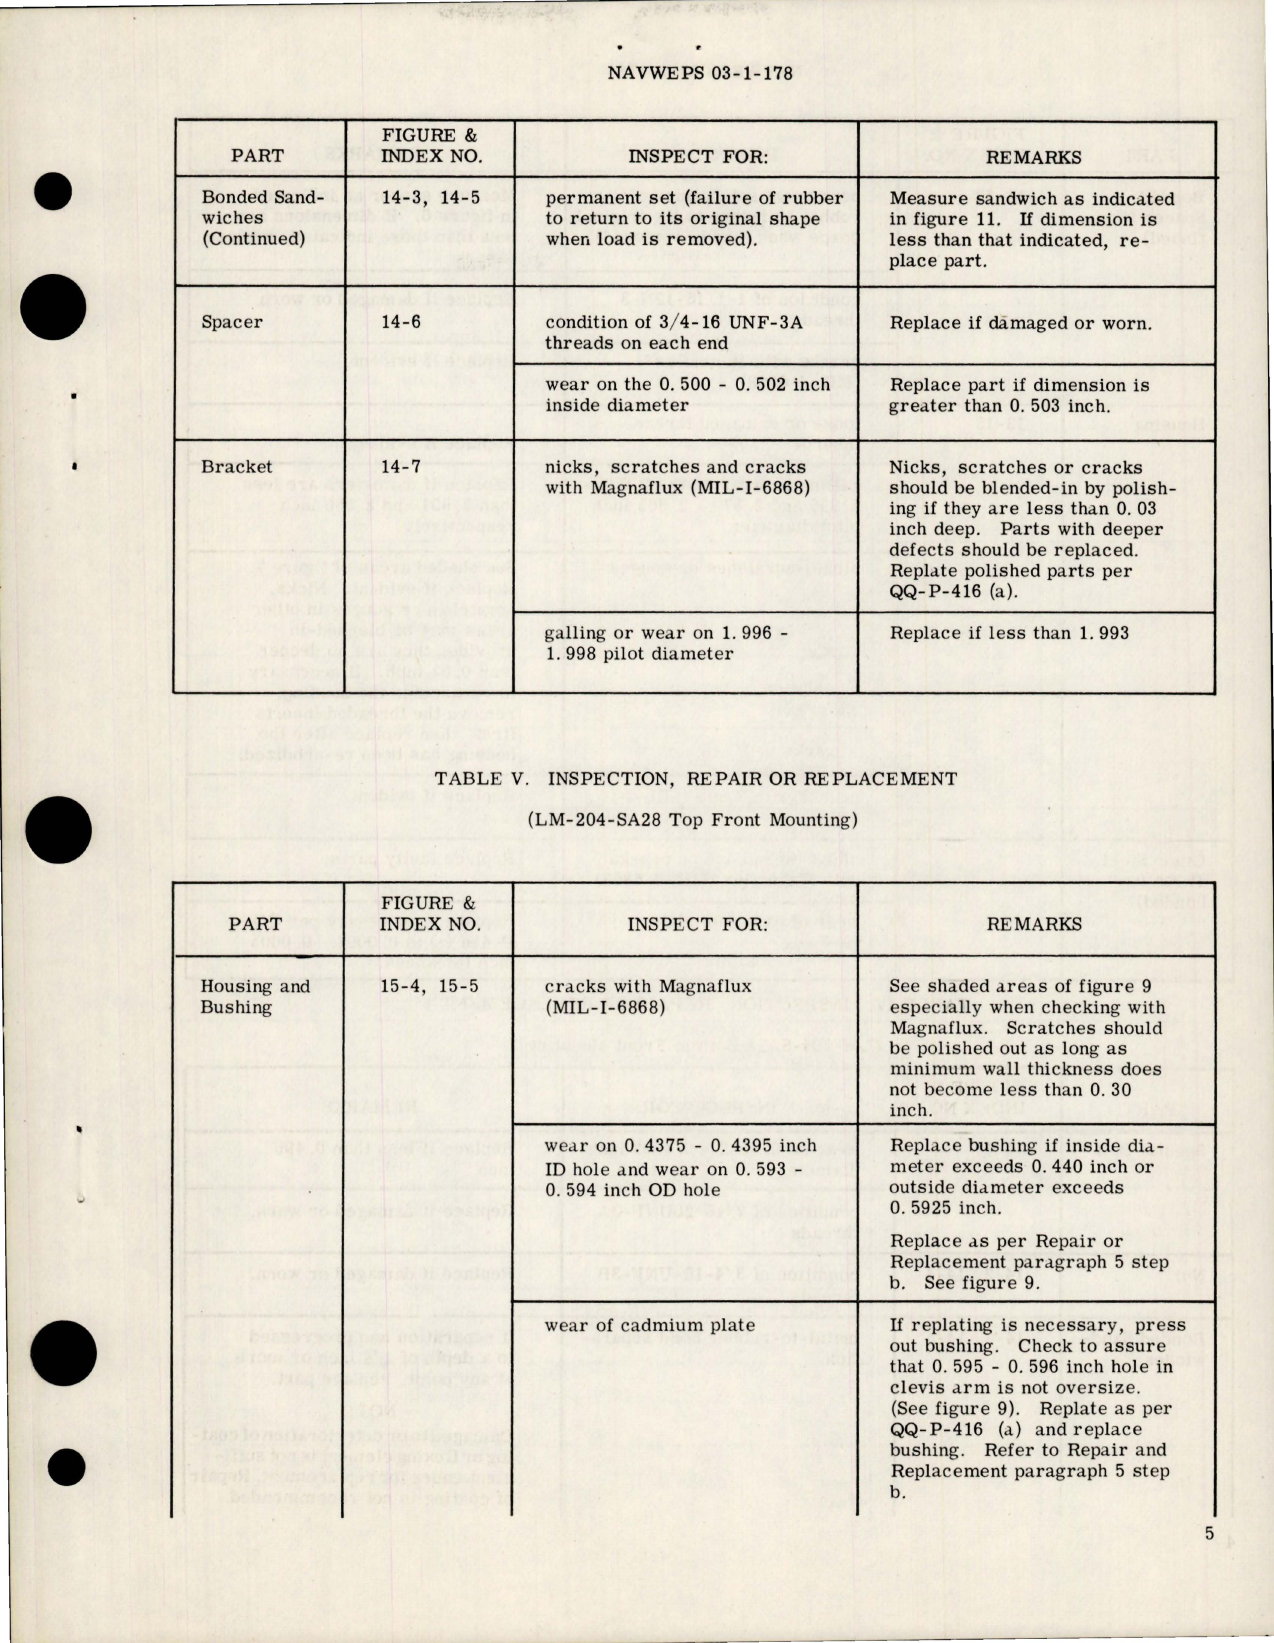 Sample page 7 from AirCorps Library document: Overhaul Instructions with Parts for Dynafocal Engine Mountings 